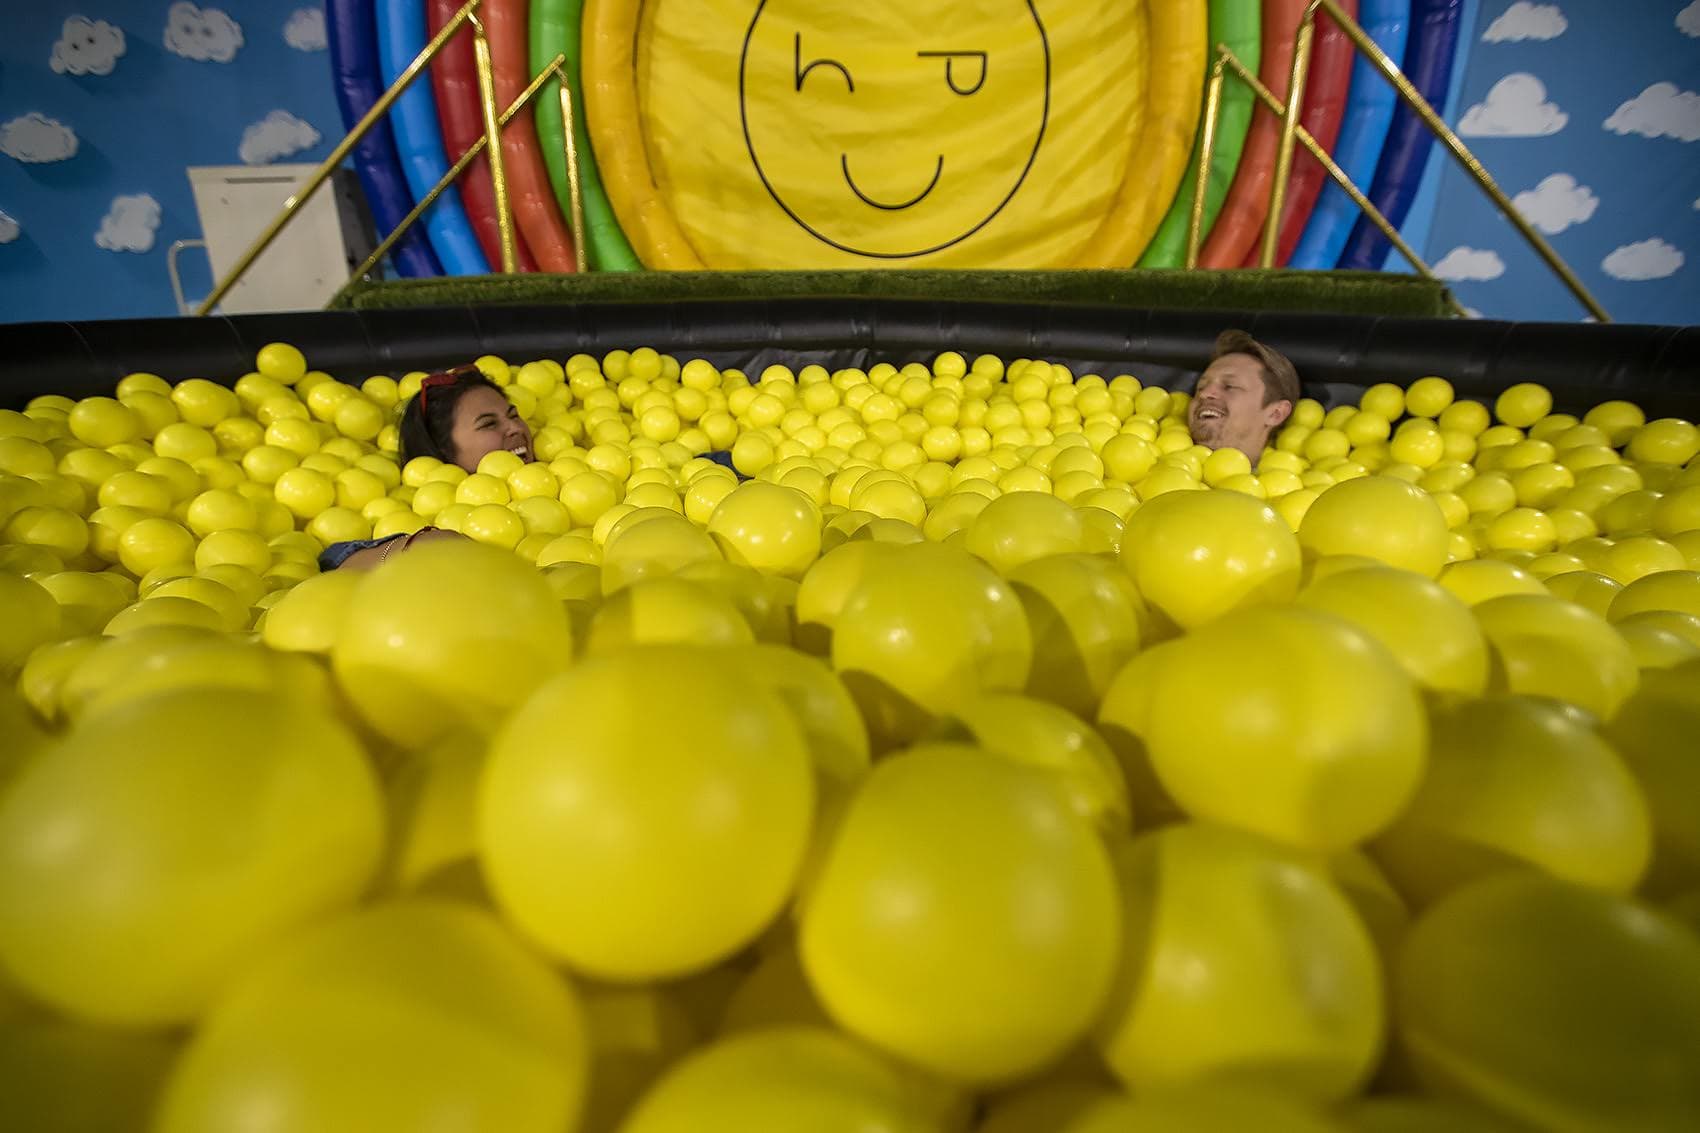 Madison Munoz and Riley Bates enjoy themselves in the pool of yellow balls at “Happy Place.” (Jesse Costa/WBUR)